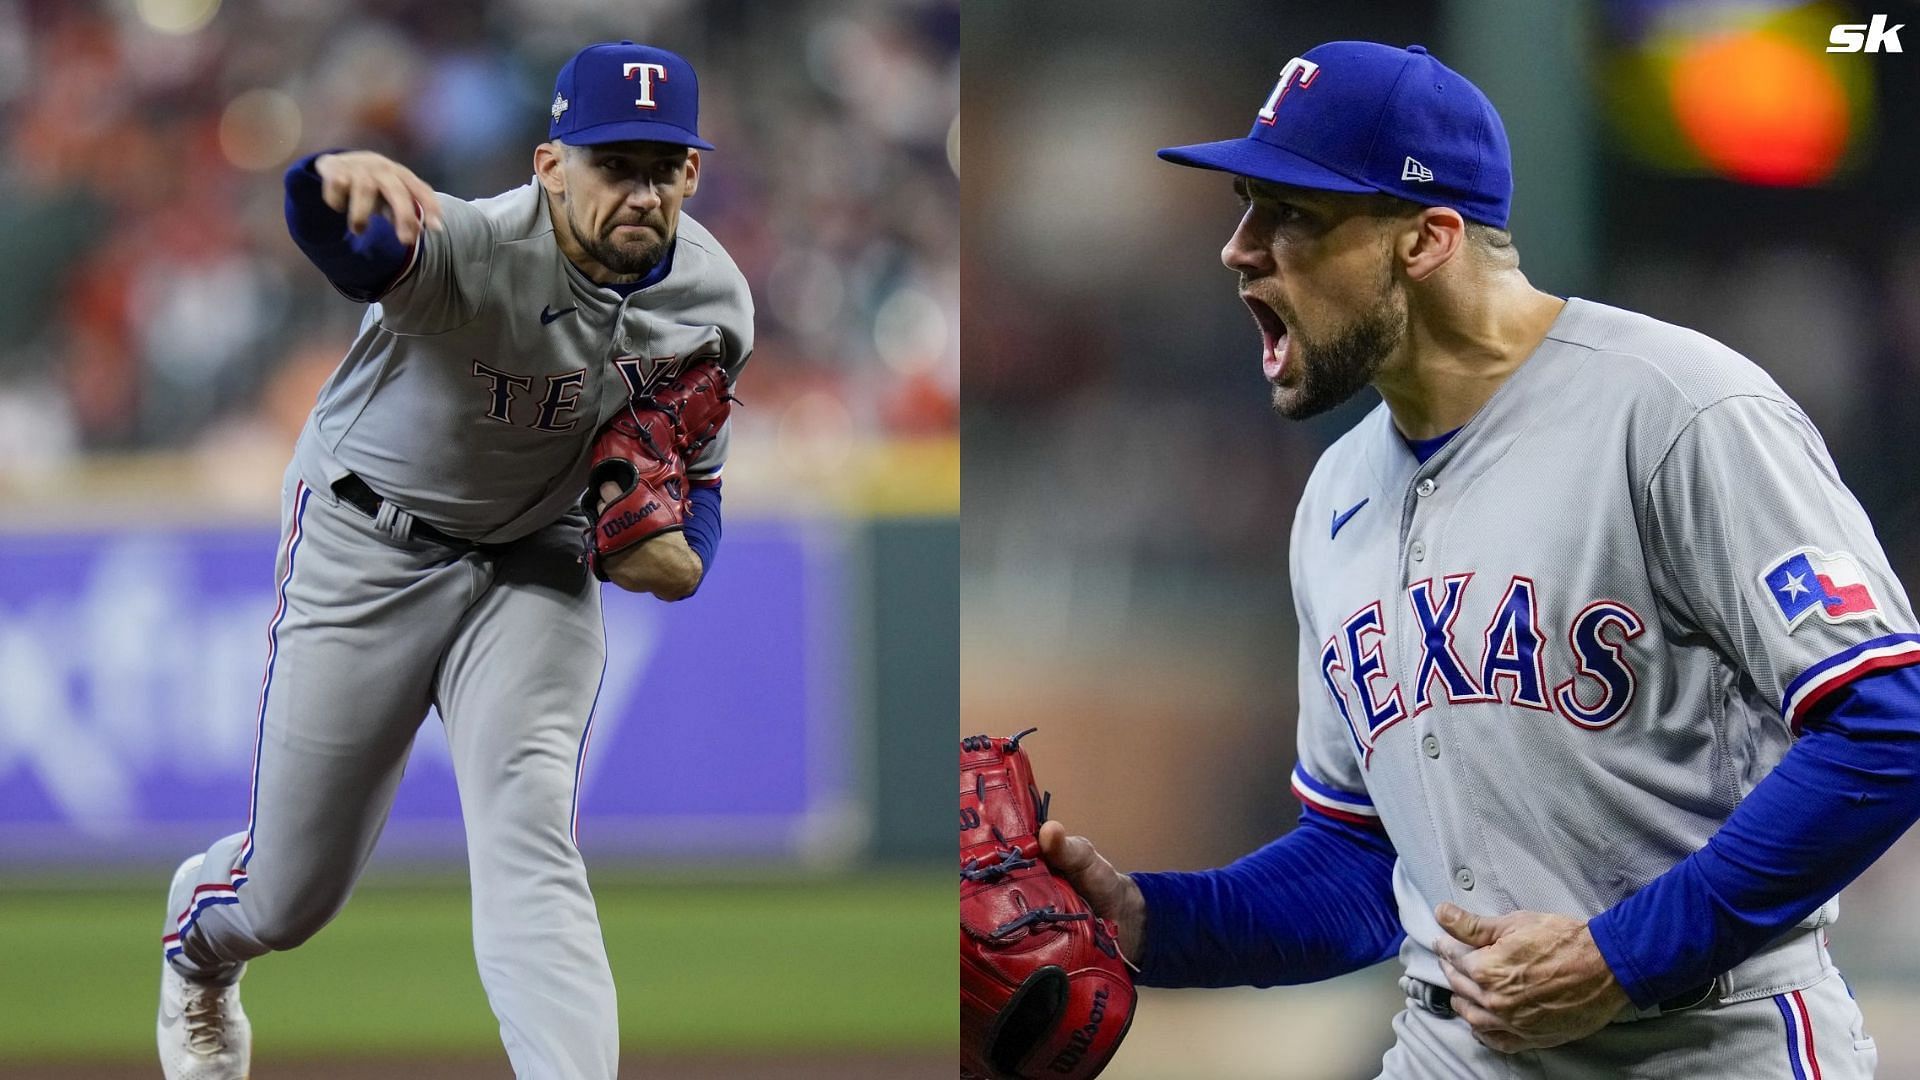 Bruce Bochy hails Nathan Eovaldi as Rangers continue postseason streak -  You're talking about one of the elite pitchers in the game